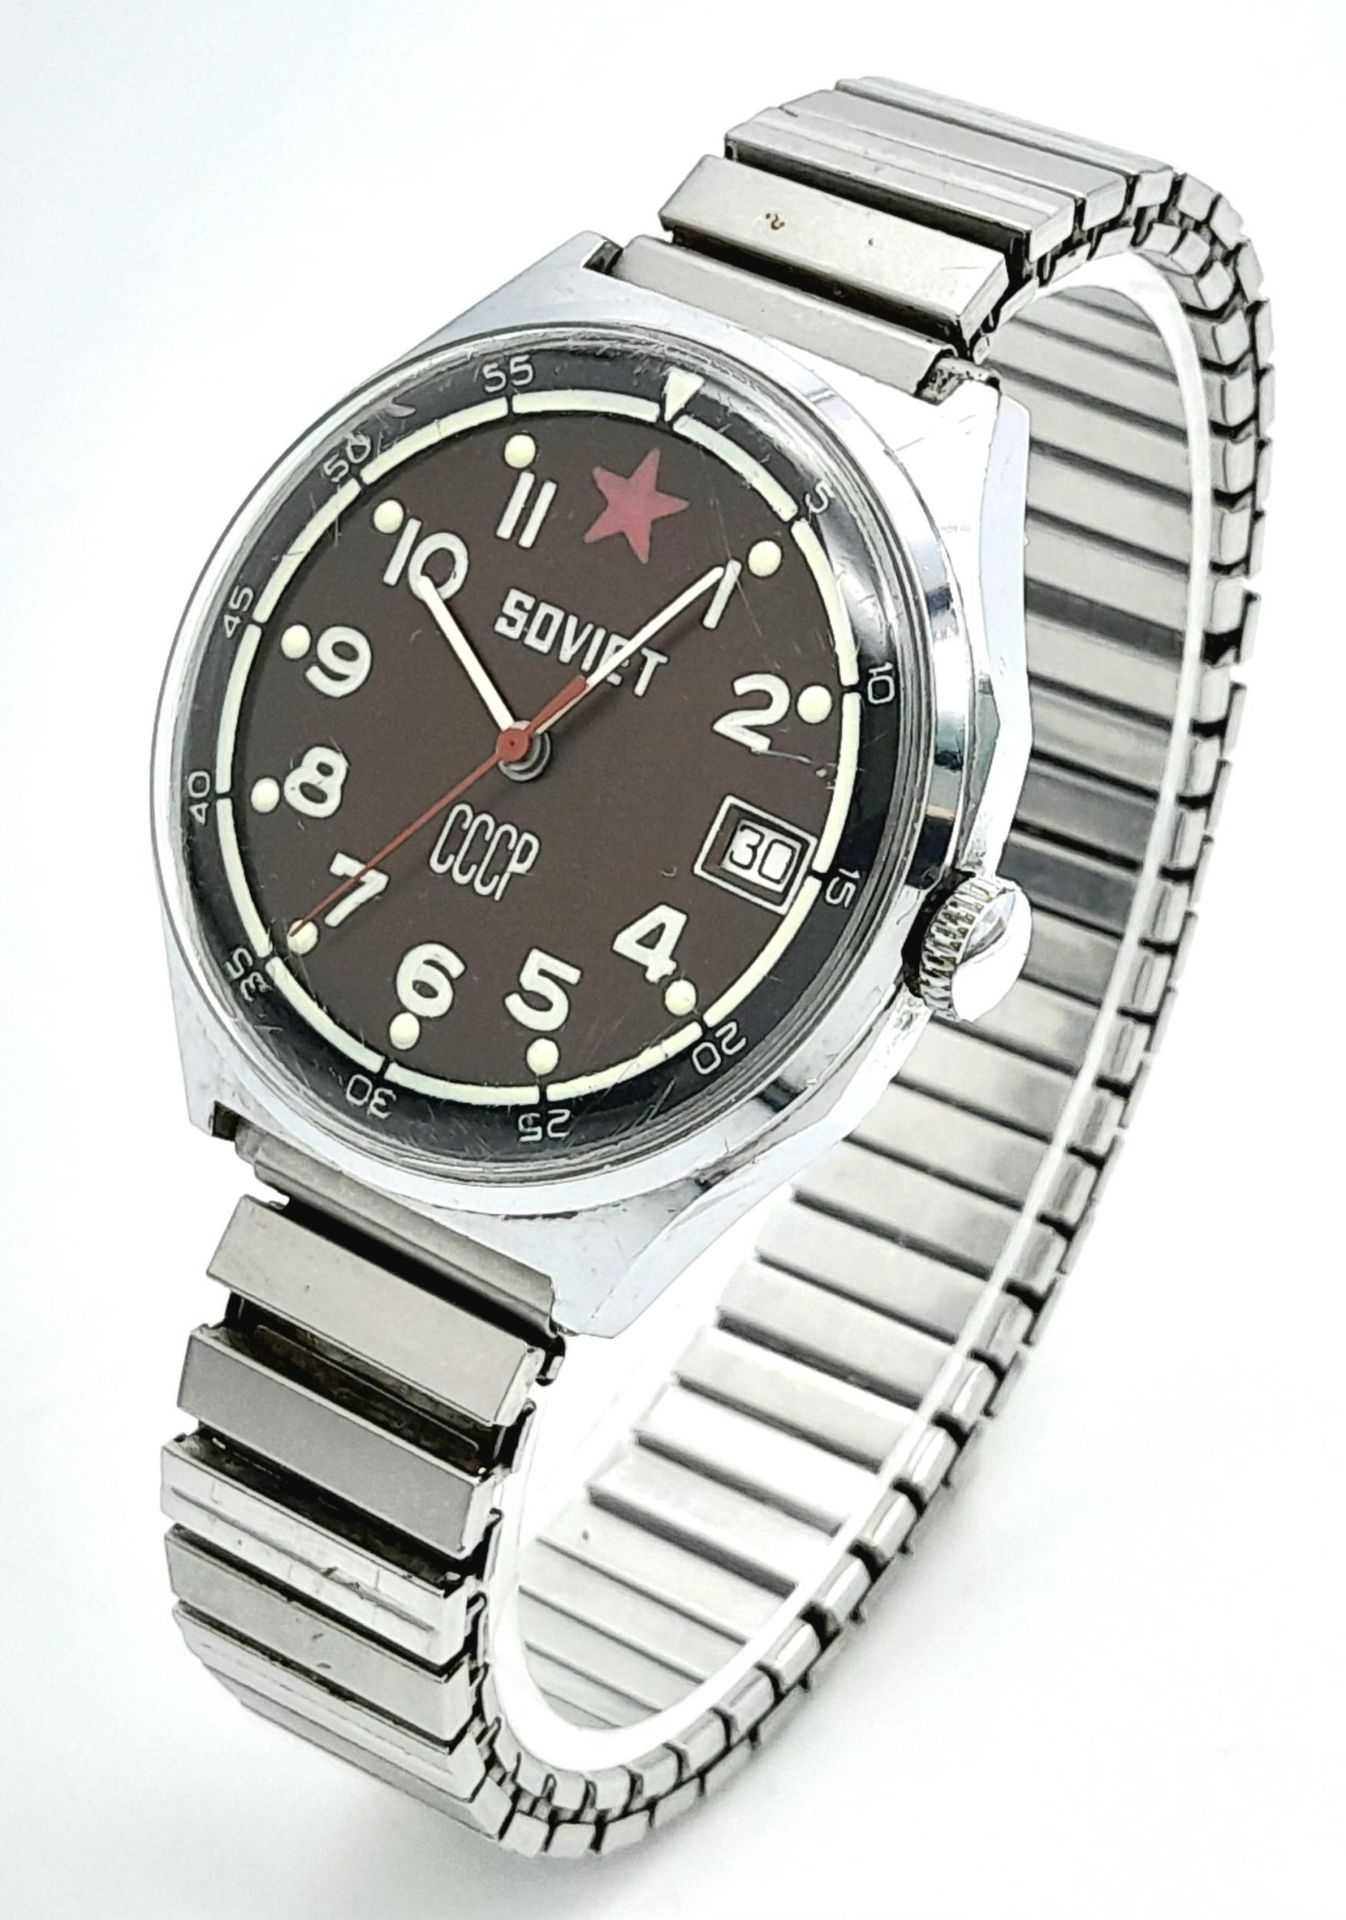 A Vintage Russian Soviet CCCP Manual Wind Stainless Steel Date Watch. 40mm Including Crown. Full